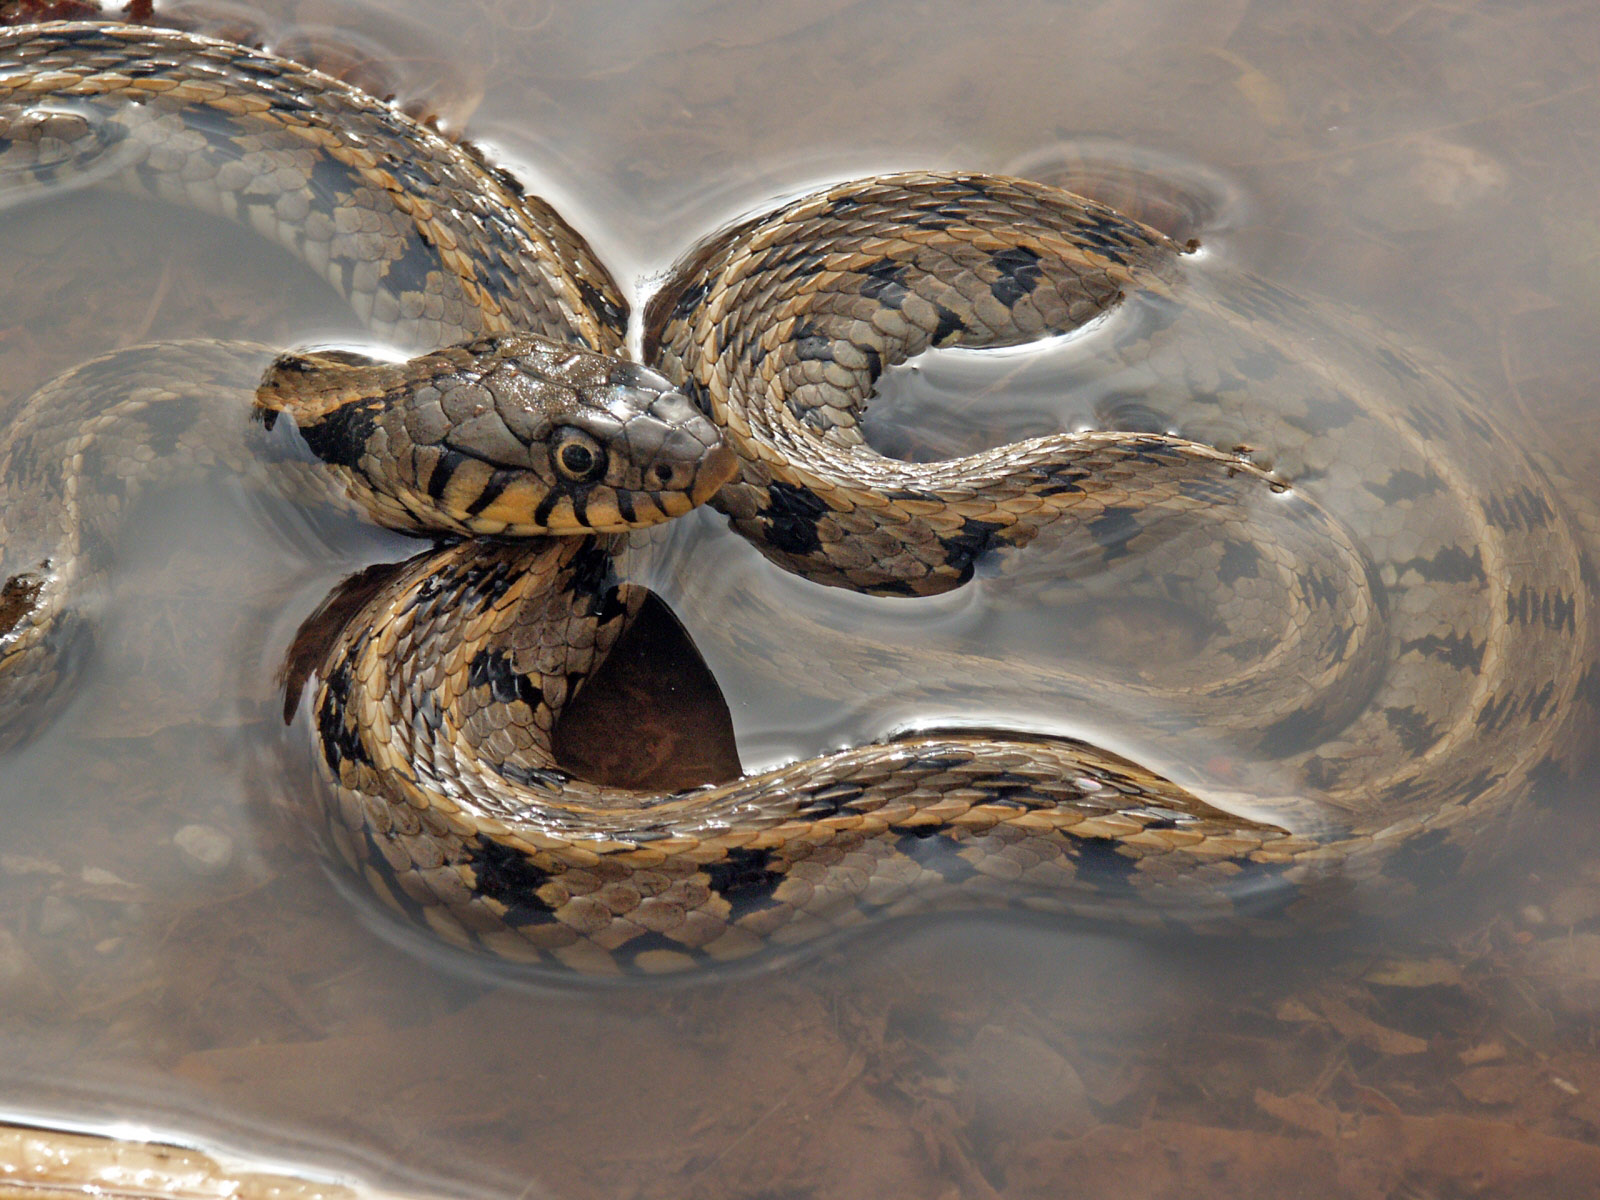 Snake in water photo